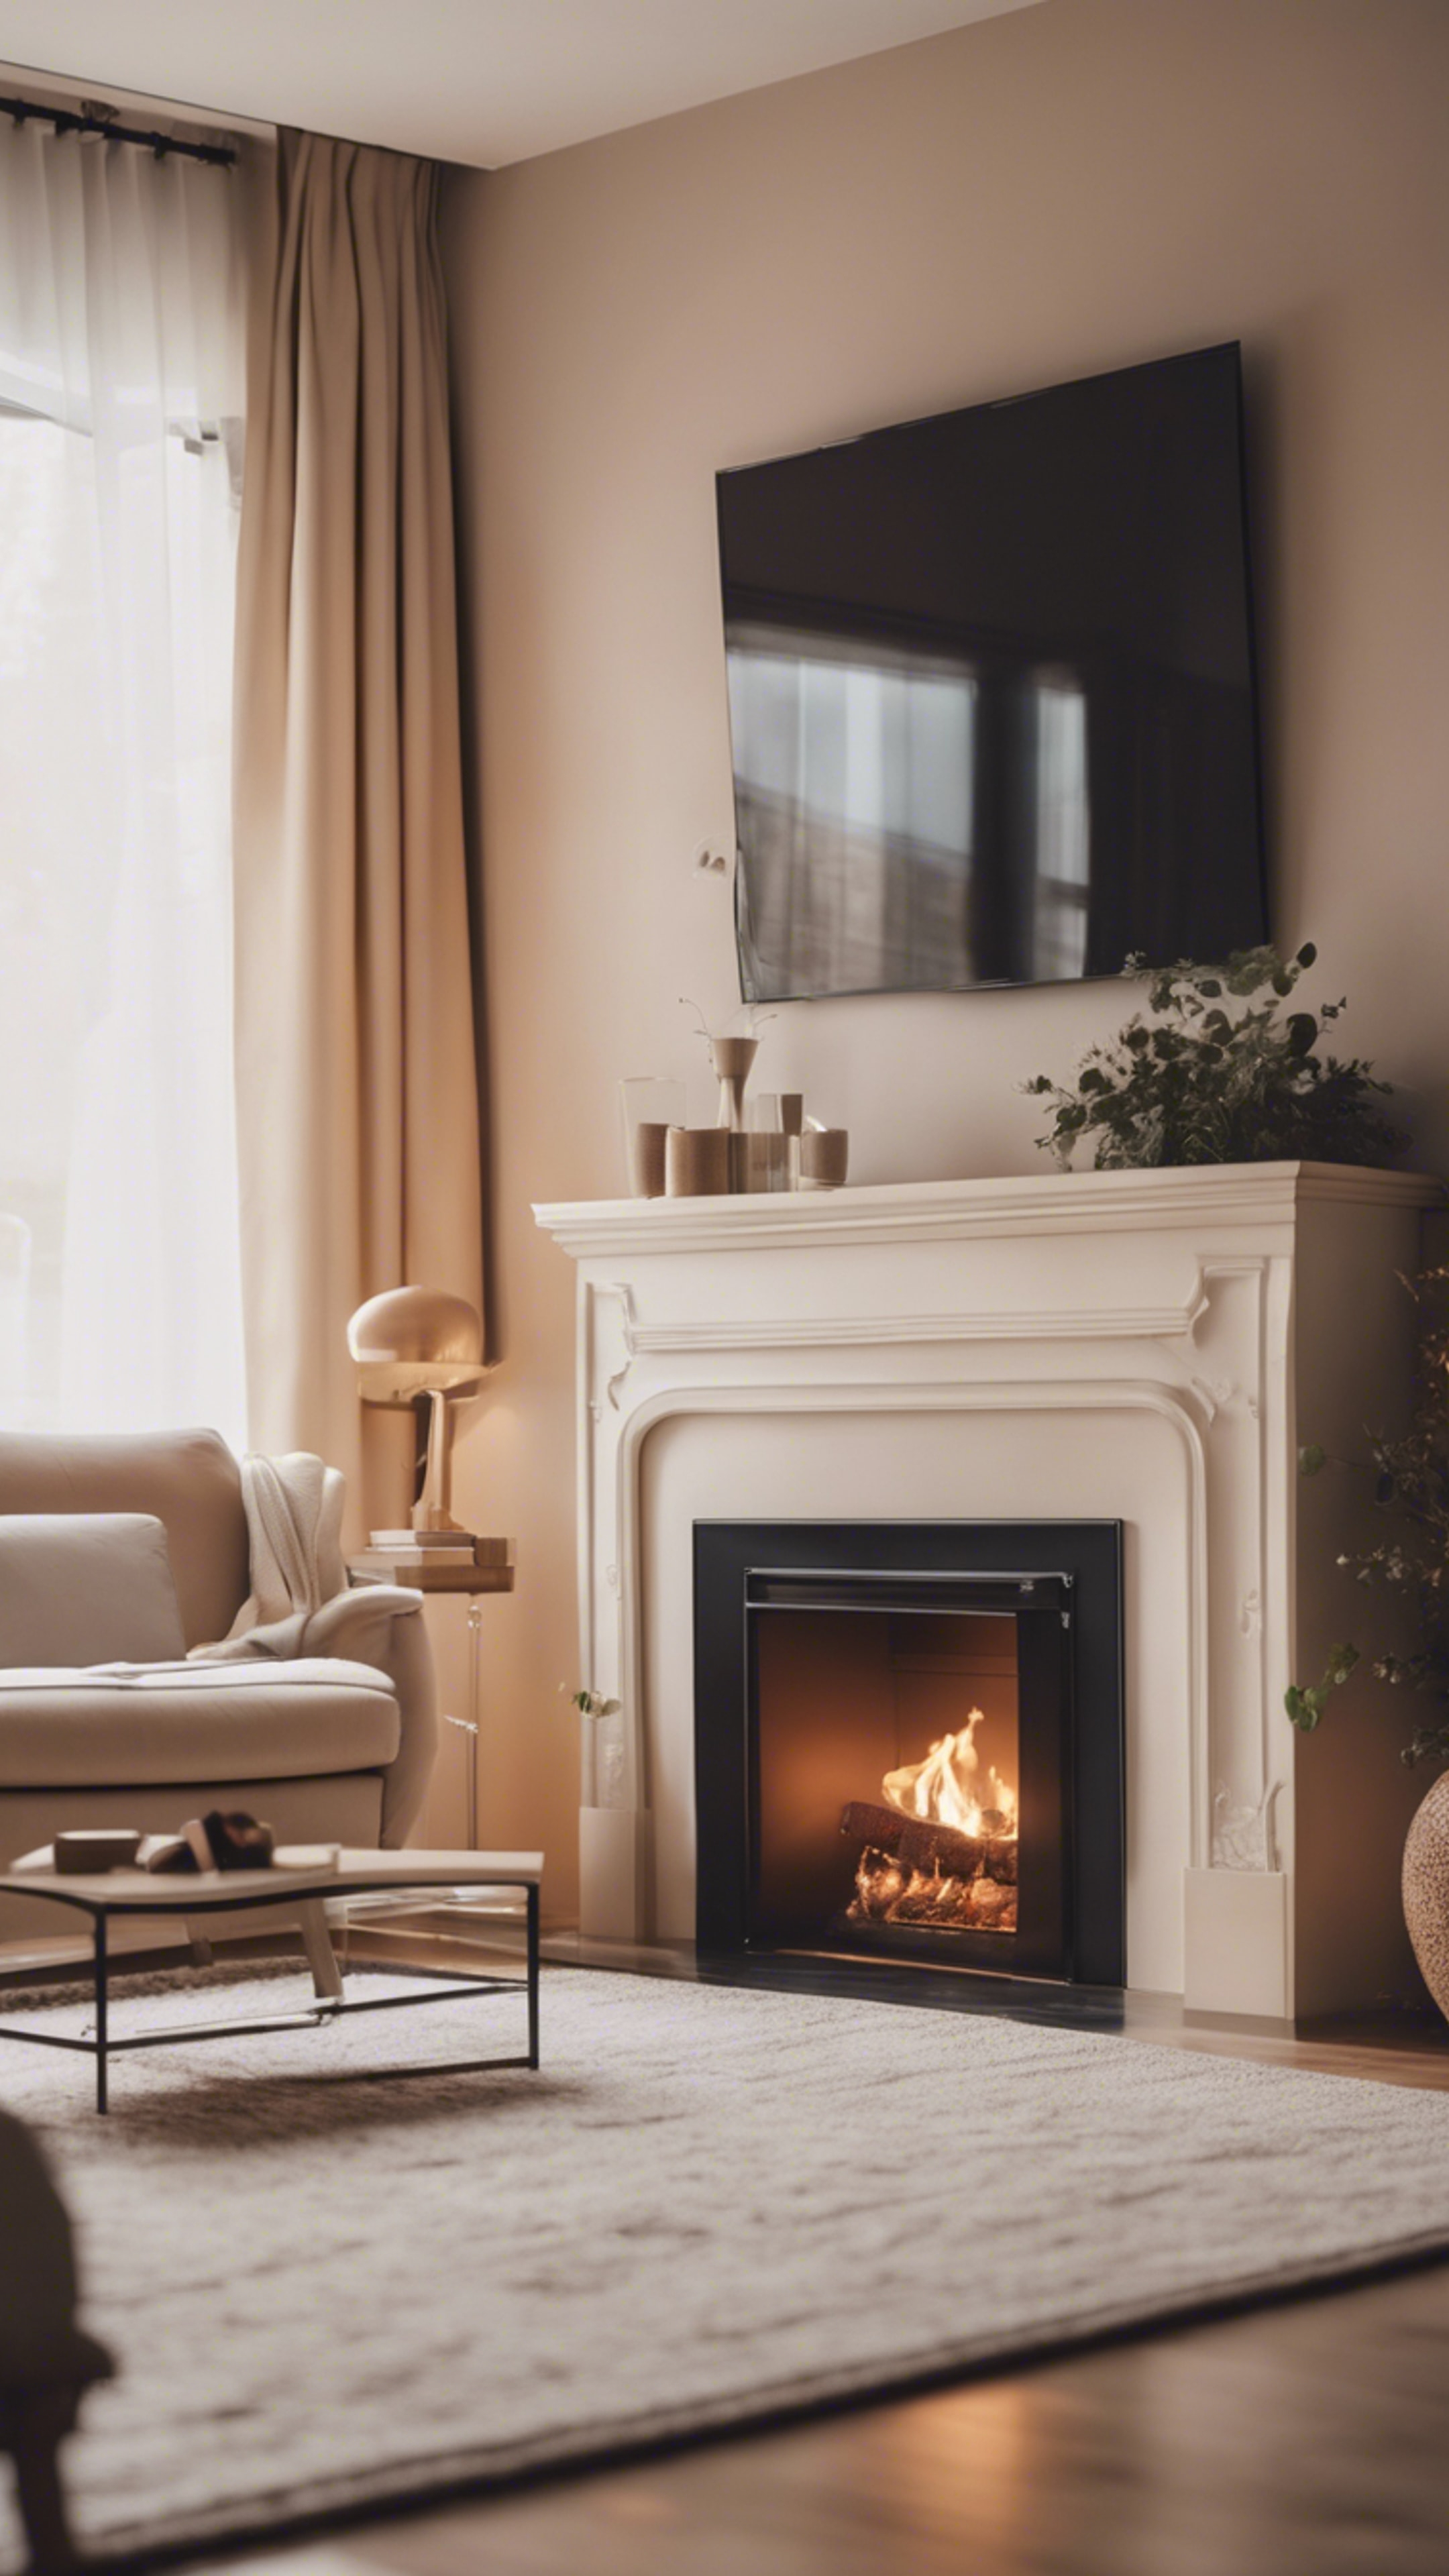 A cozy and tranquil cool beige living room with a fireplace alive with dancing flames. Papel de parede[fdd7e3460c134e479b57]